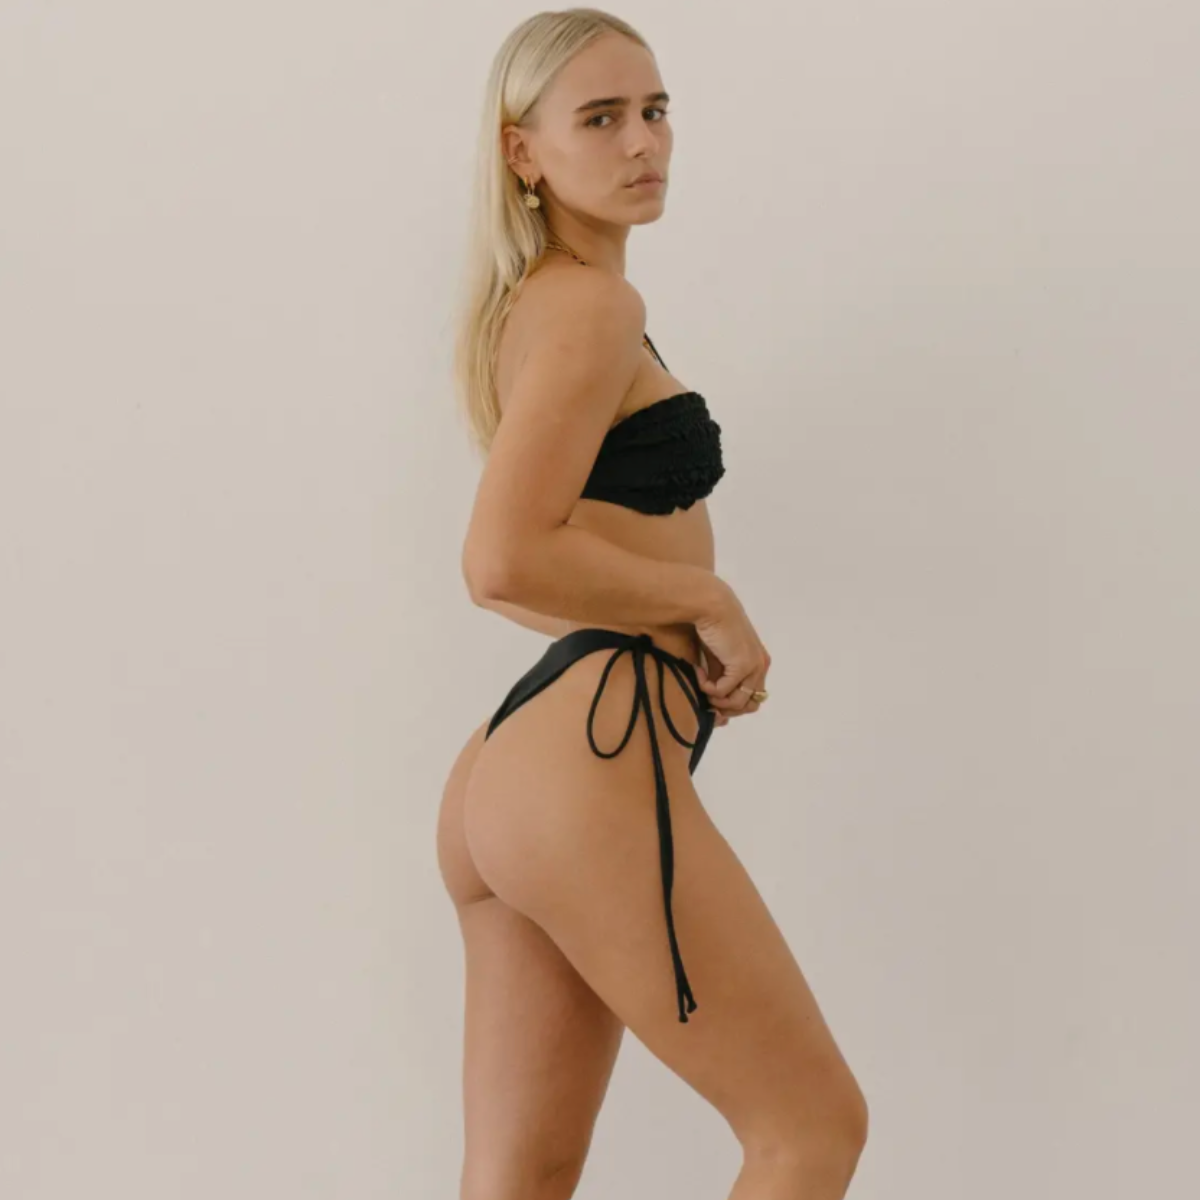 Ziemia Bikini - Black, Smocked Bandeau Top with Optional Halter Tie, by TIALS, Made in Bali, Side Tie Bottoms, Minimal Coverage Bottoms